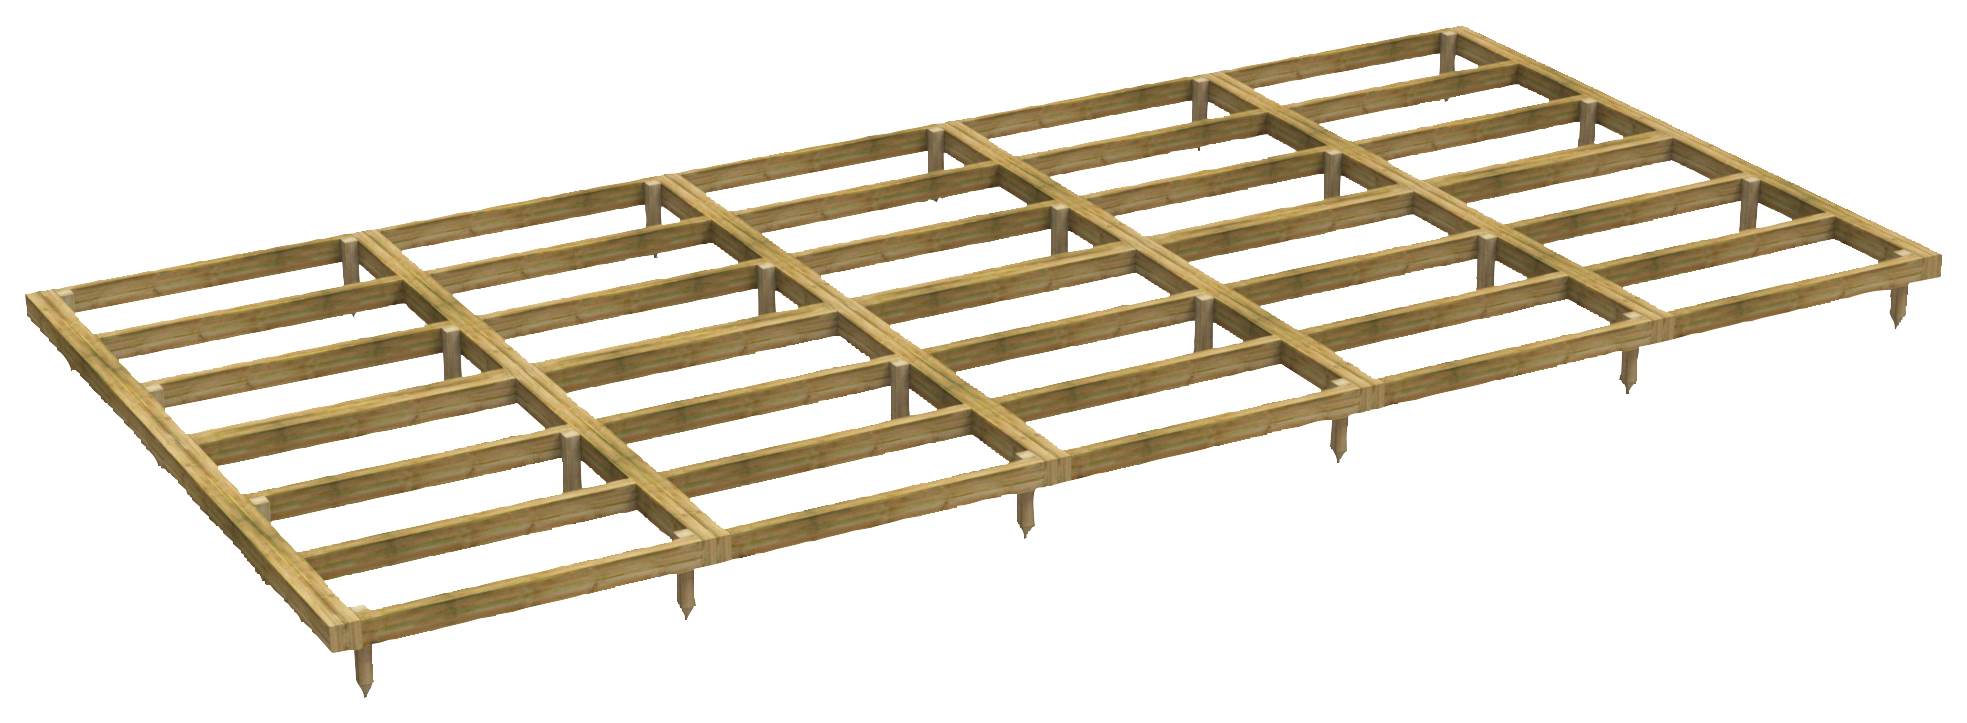 Image of Power Sheds 20 x 10ft Pressure Treated Garden Building Base Kit